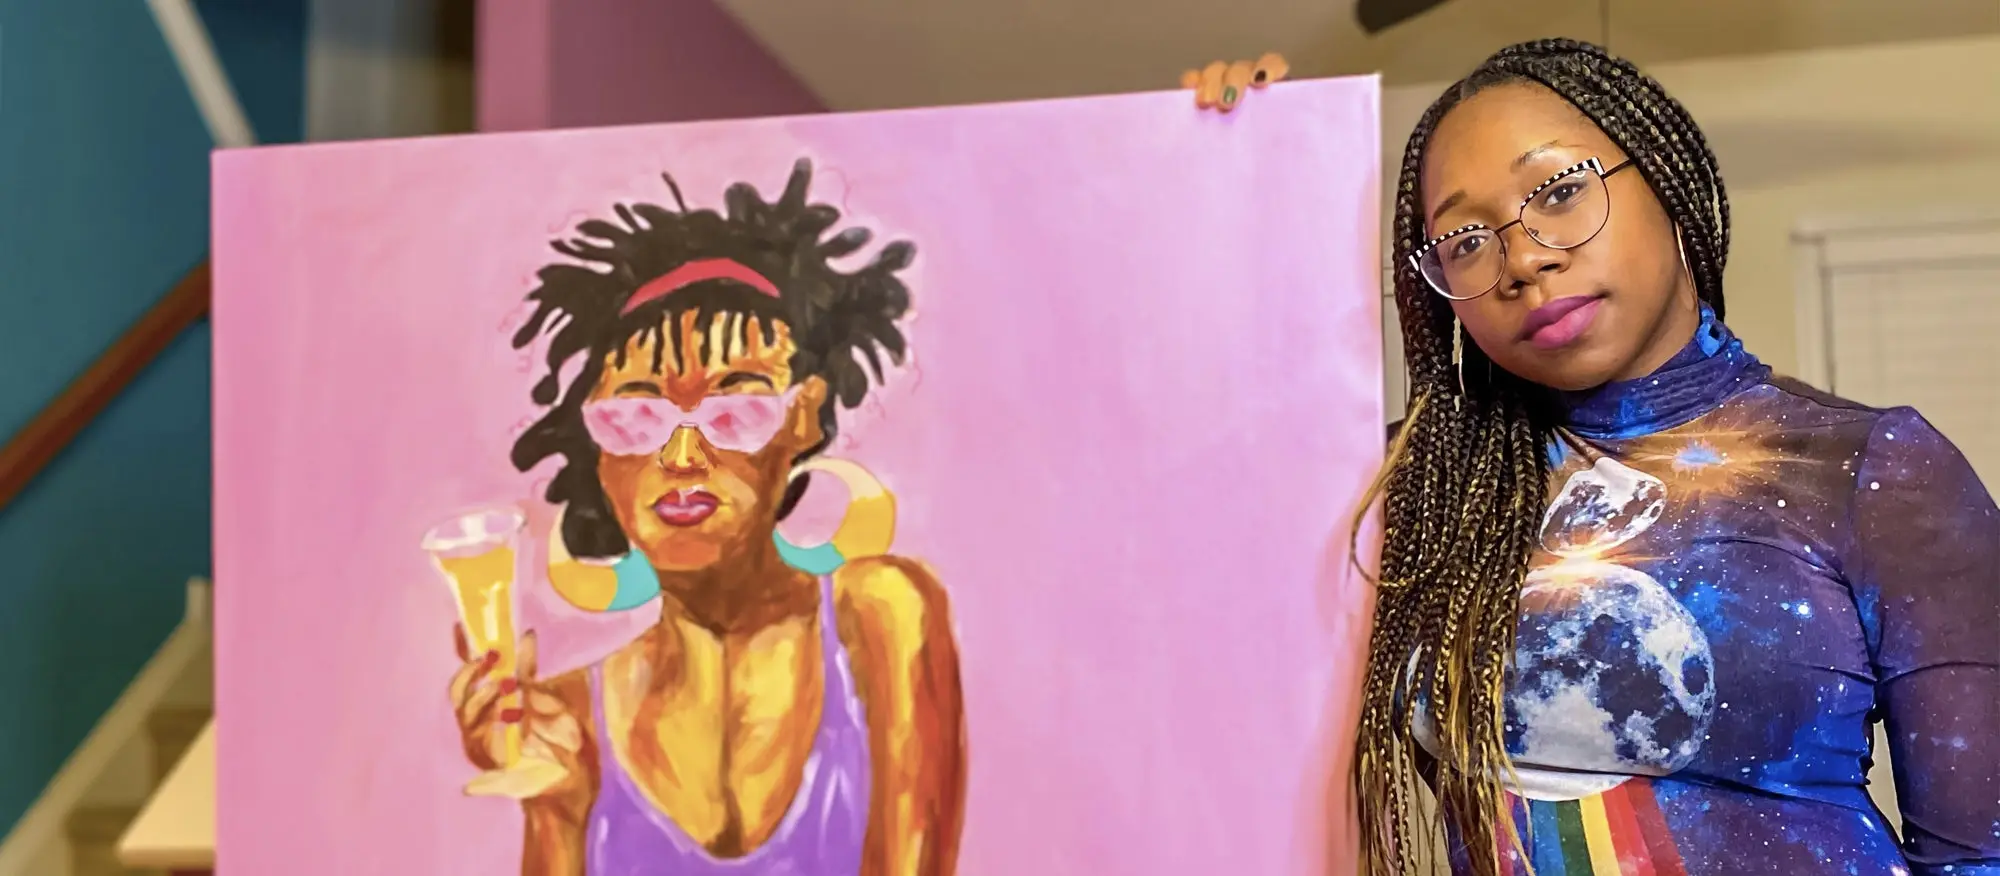 A photo of Carita, diversity & inclusion program manager at Adobe, holding one of her paintings.